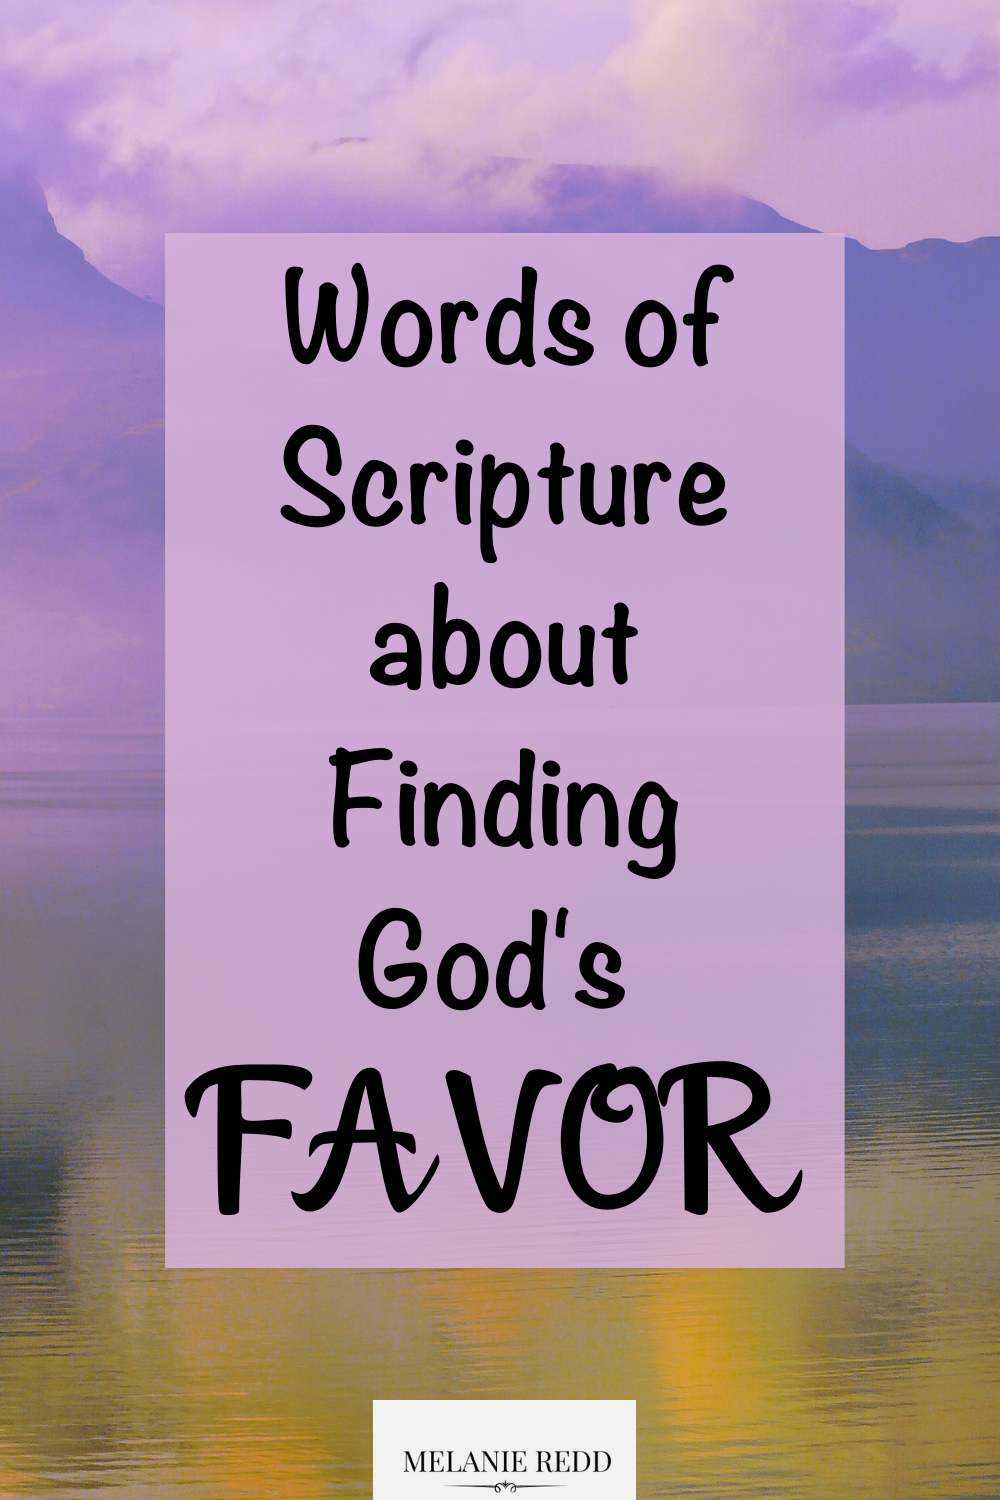 Blessings. Approval. Goodness. Grace. All of these are amazing gifts from God. Things that we want and need - part of God’s favor on our lives. What is favor? How do you gain it? Discover words of Scripture about finding God's favor. #favor #godsfavor #blessings #blessingsofgod #favorofgod